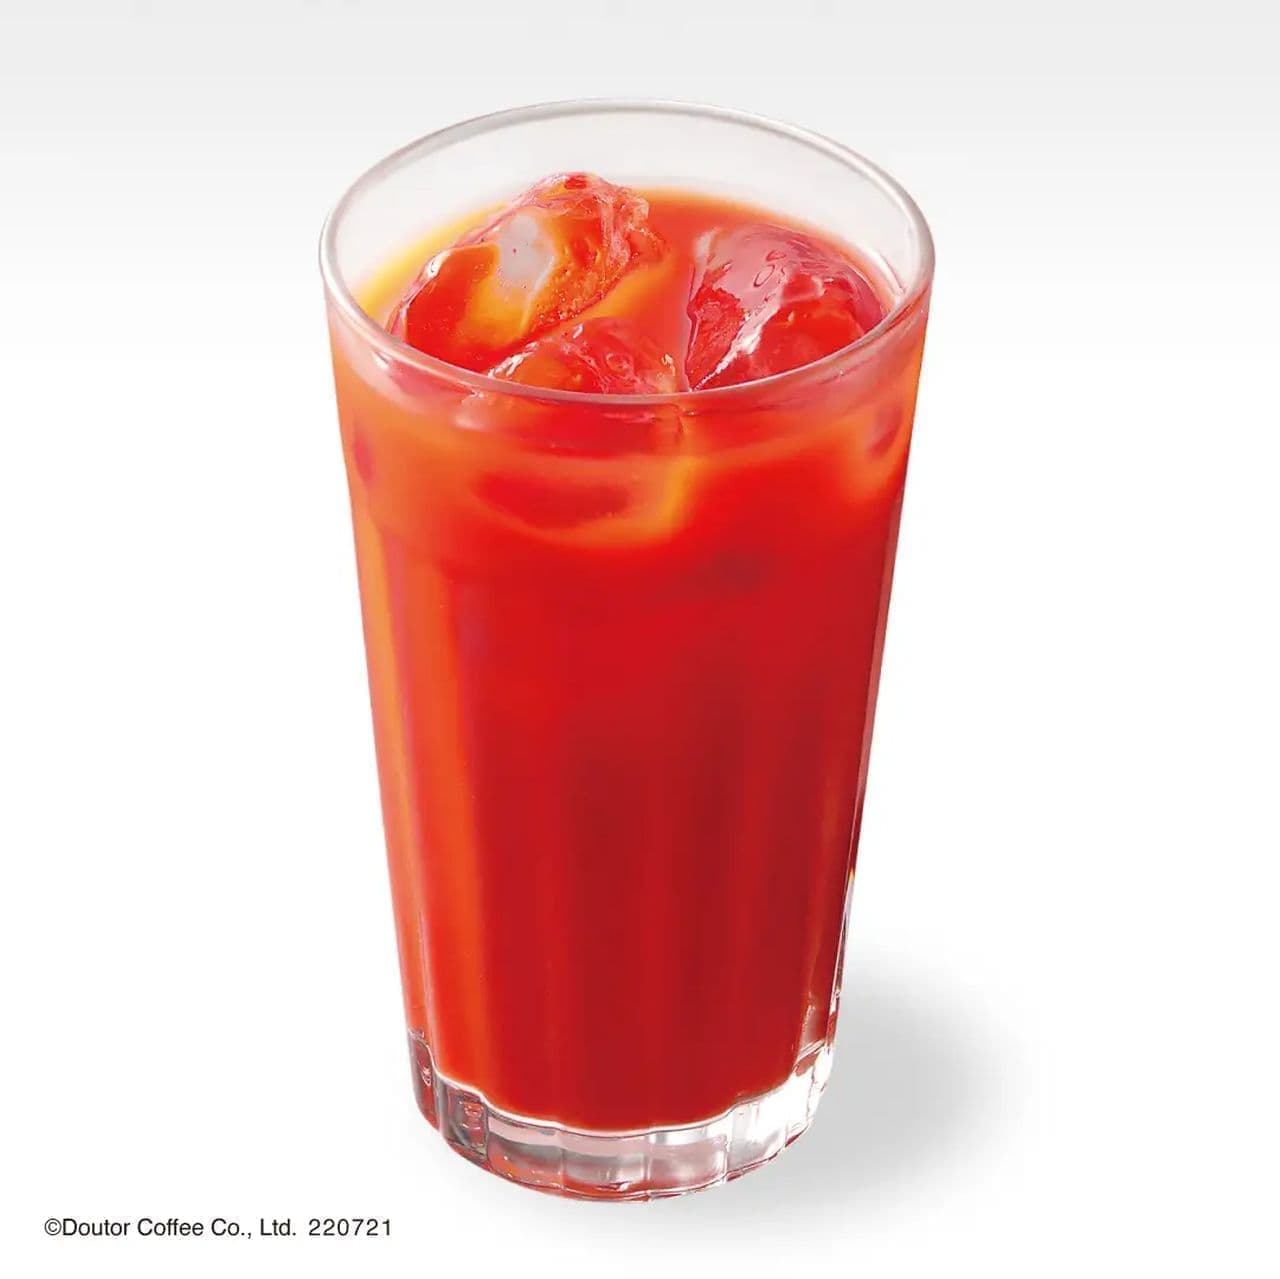 Excelsior Cafe "Fruity sweet tomato juice